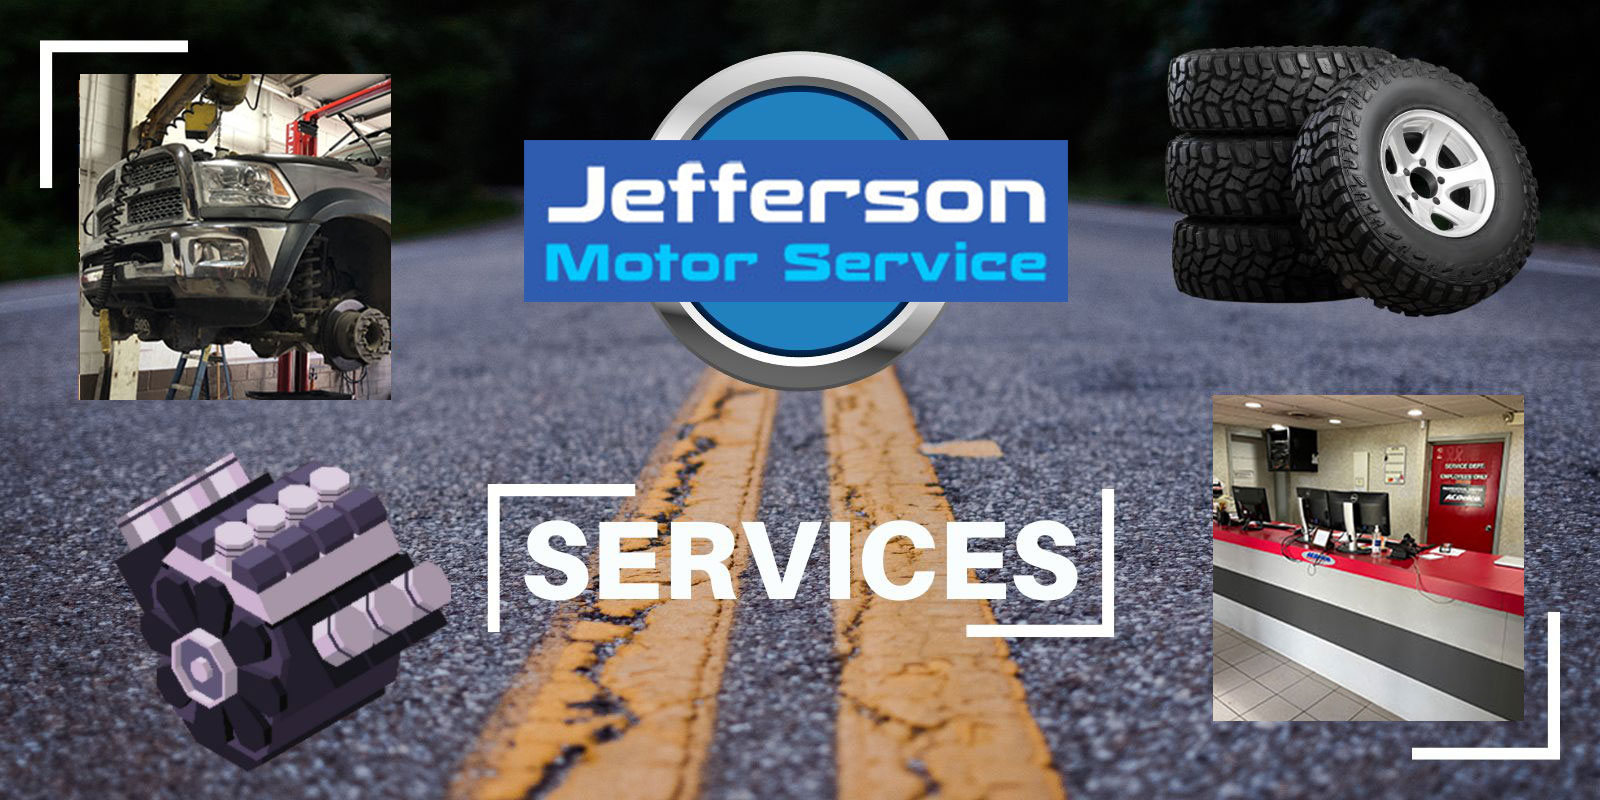 Services at Jefferson Motor Service